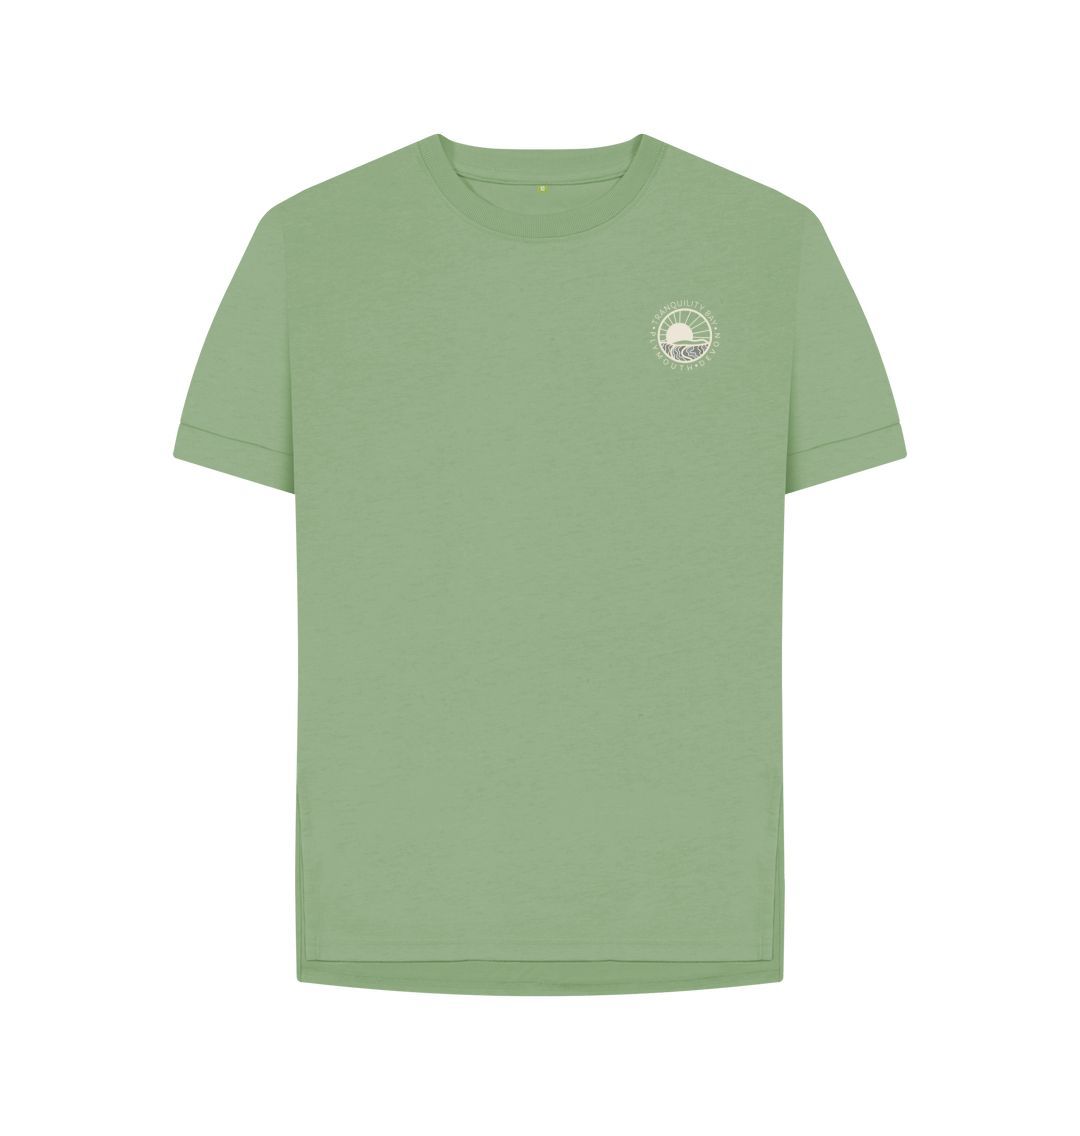 Sage Special Edition Women's Tranquility Bay Tee